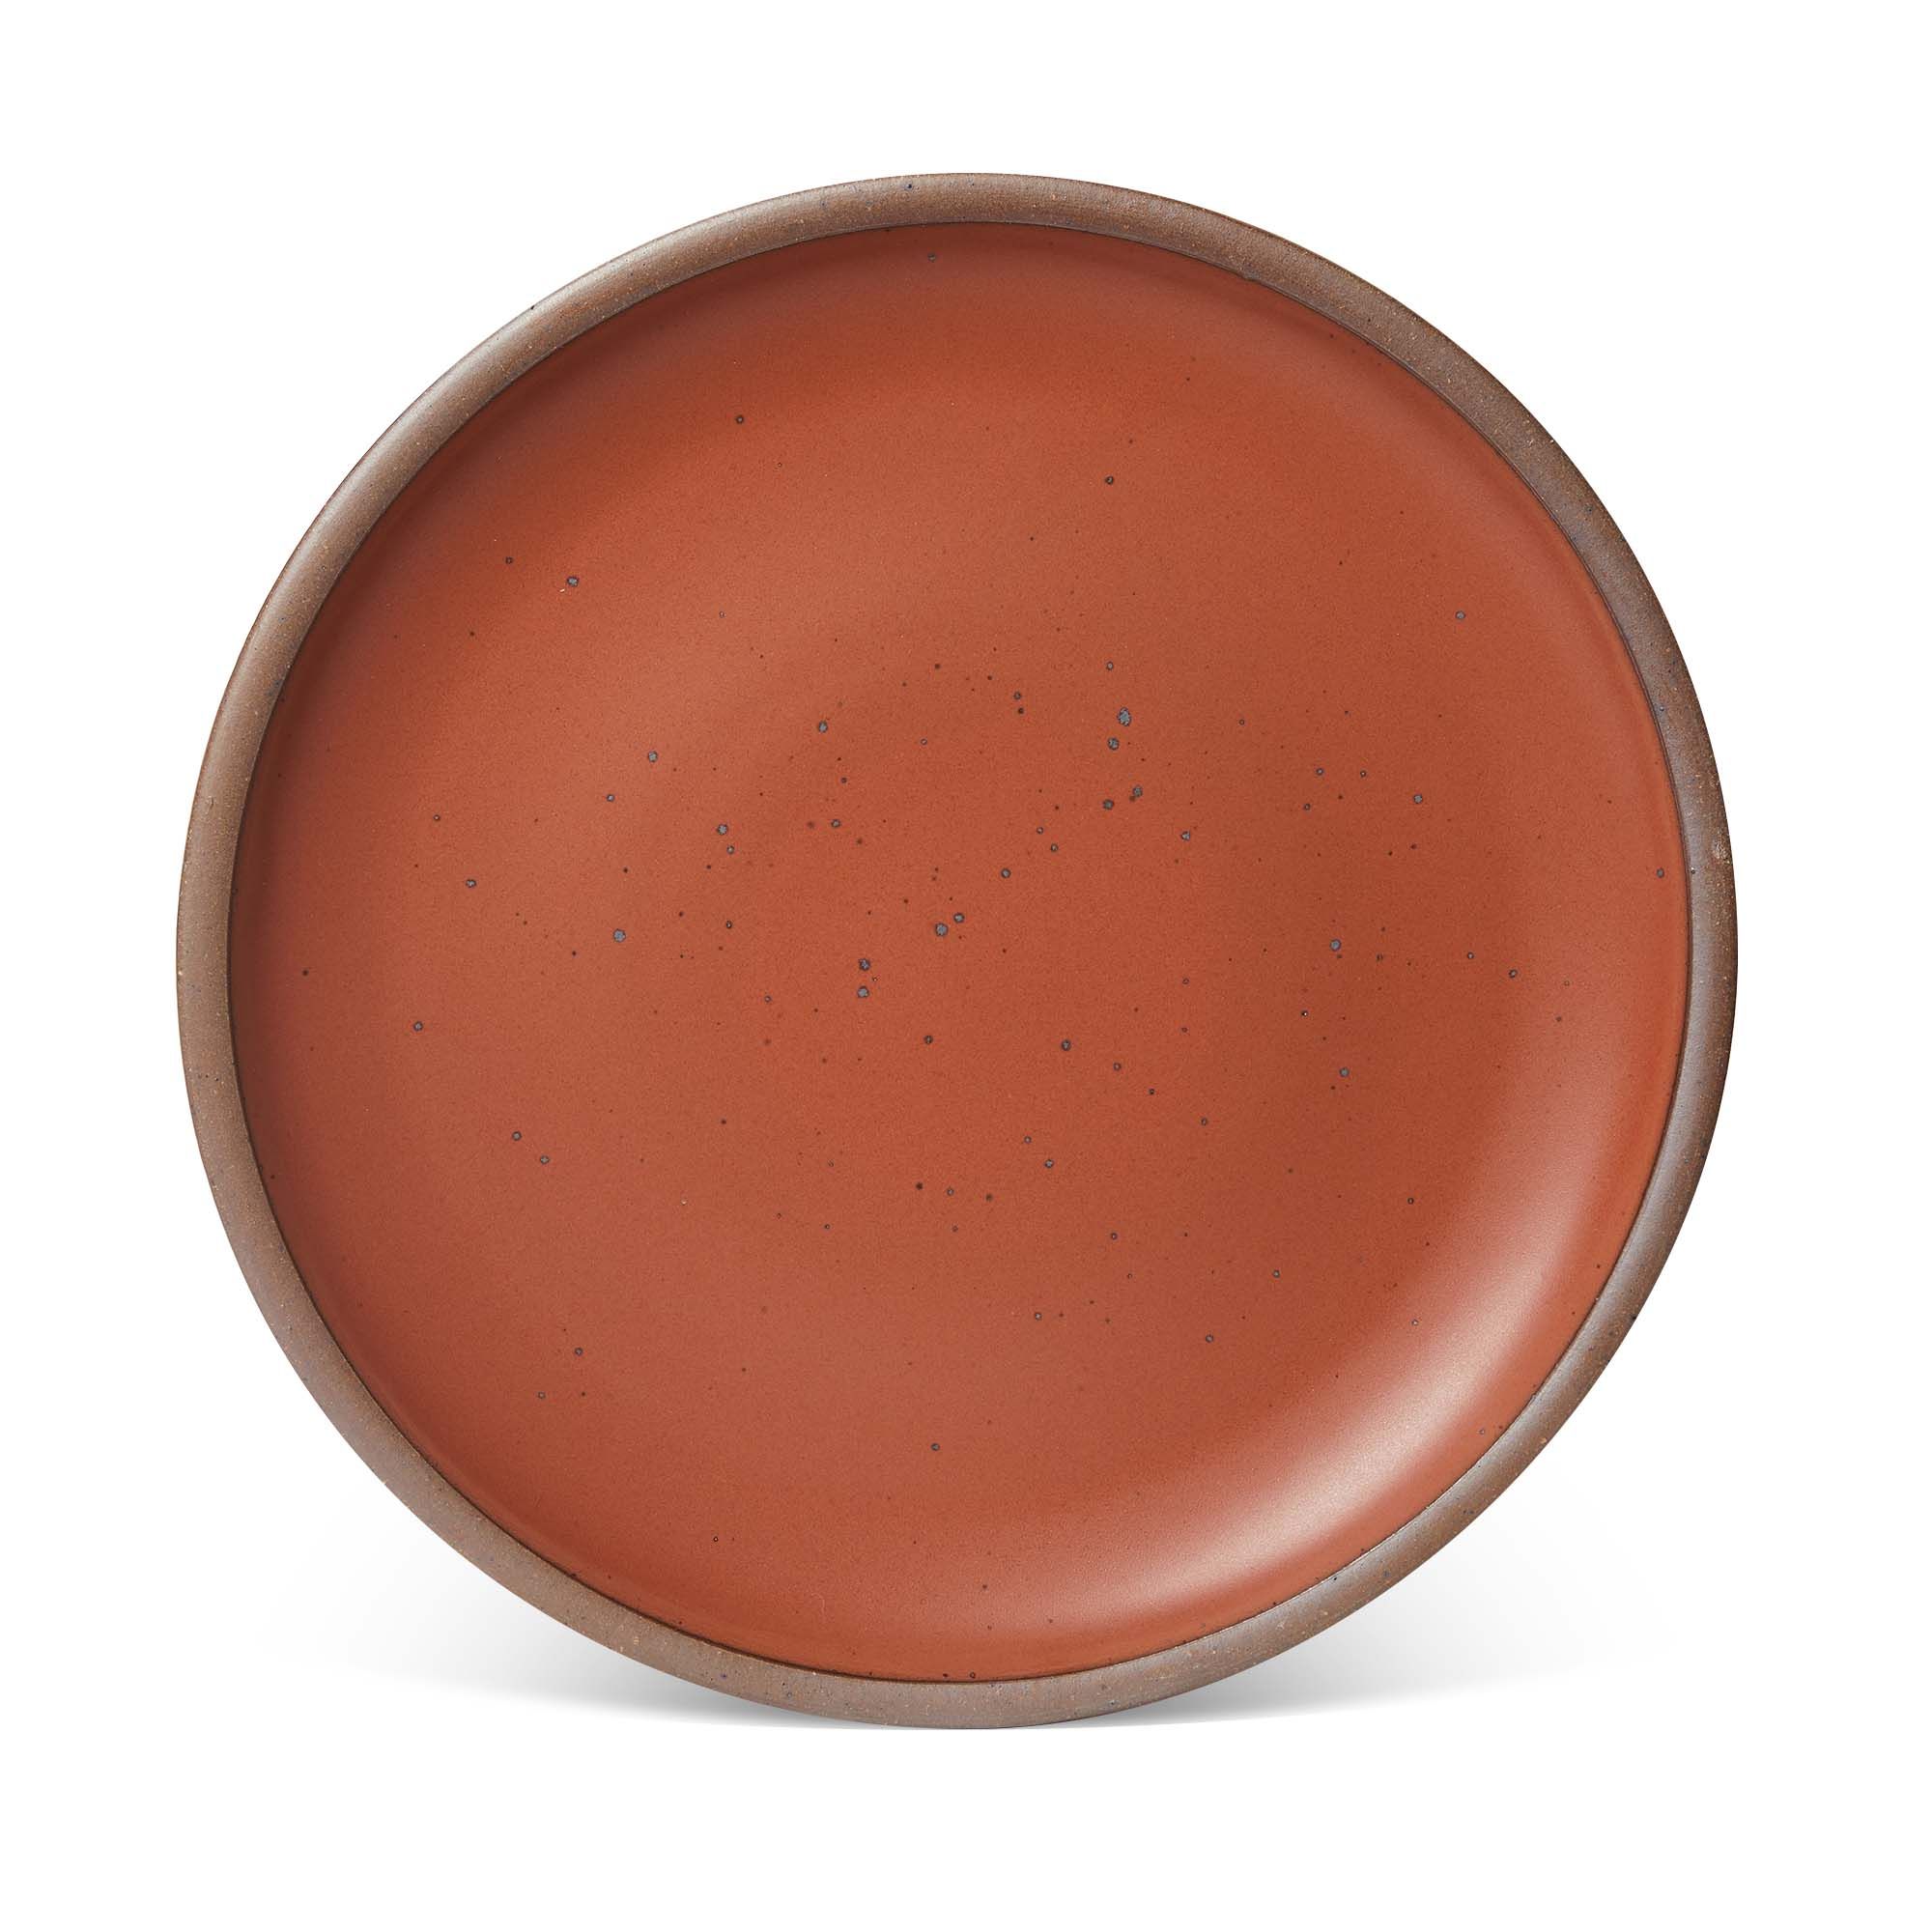 A large ceramic platter in a cool burnt terracotta color featuring iron speckles and an unglazed rim.